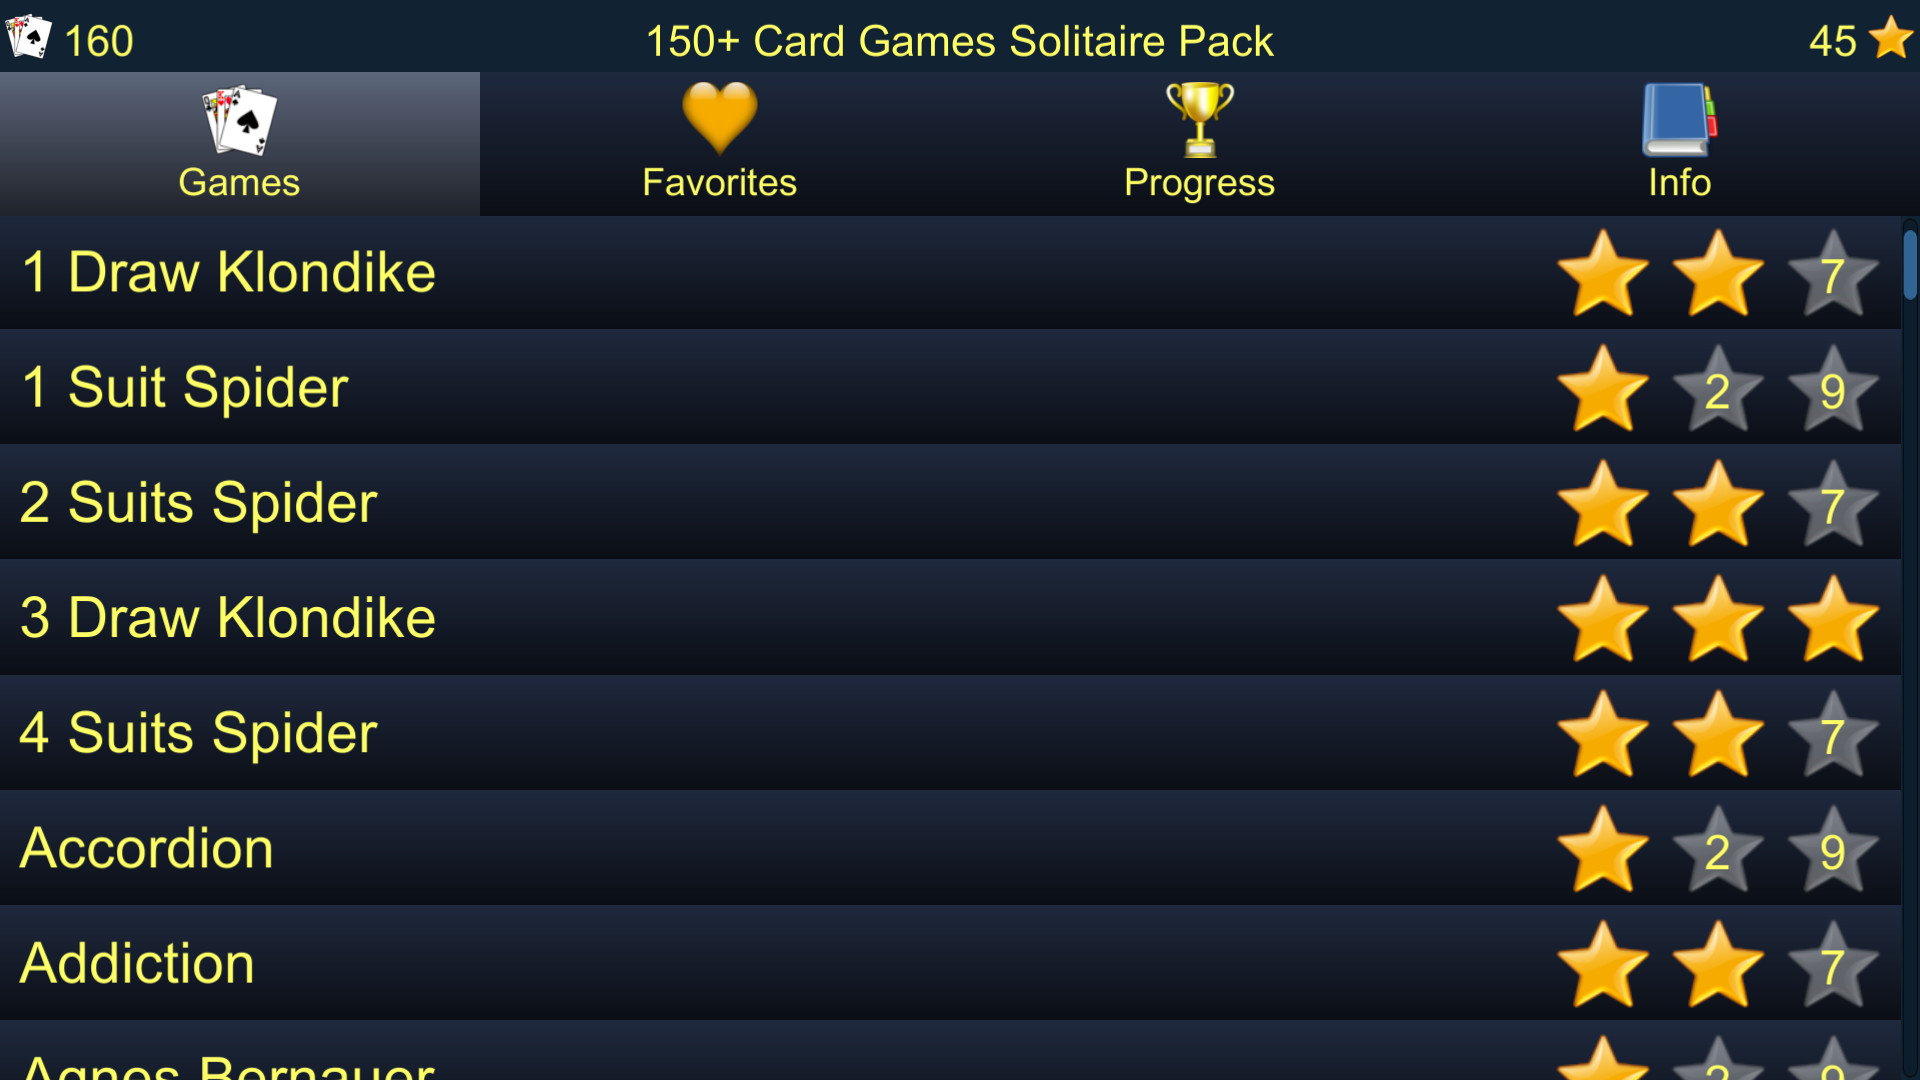 [$ 0.63] 150+ Card Games Solitaire Pack Steam CD Key